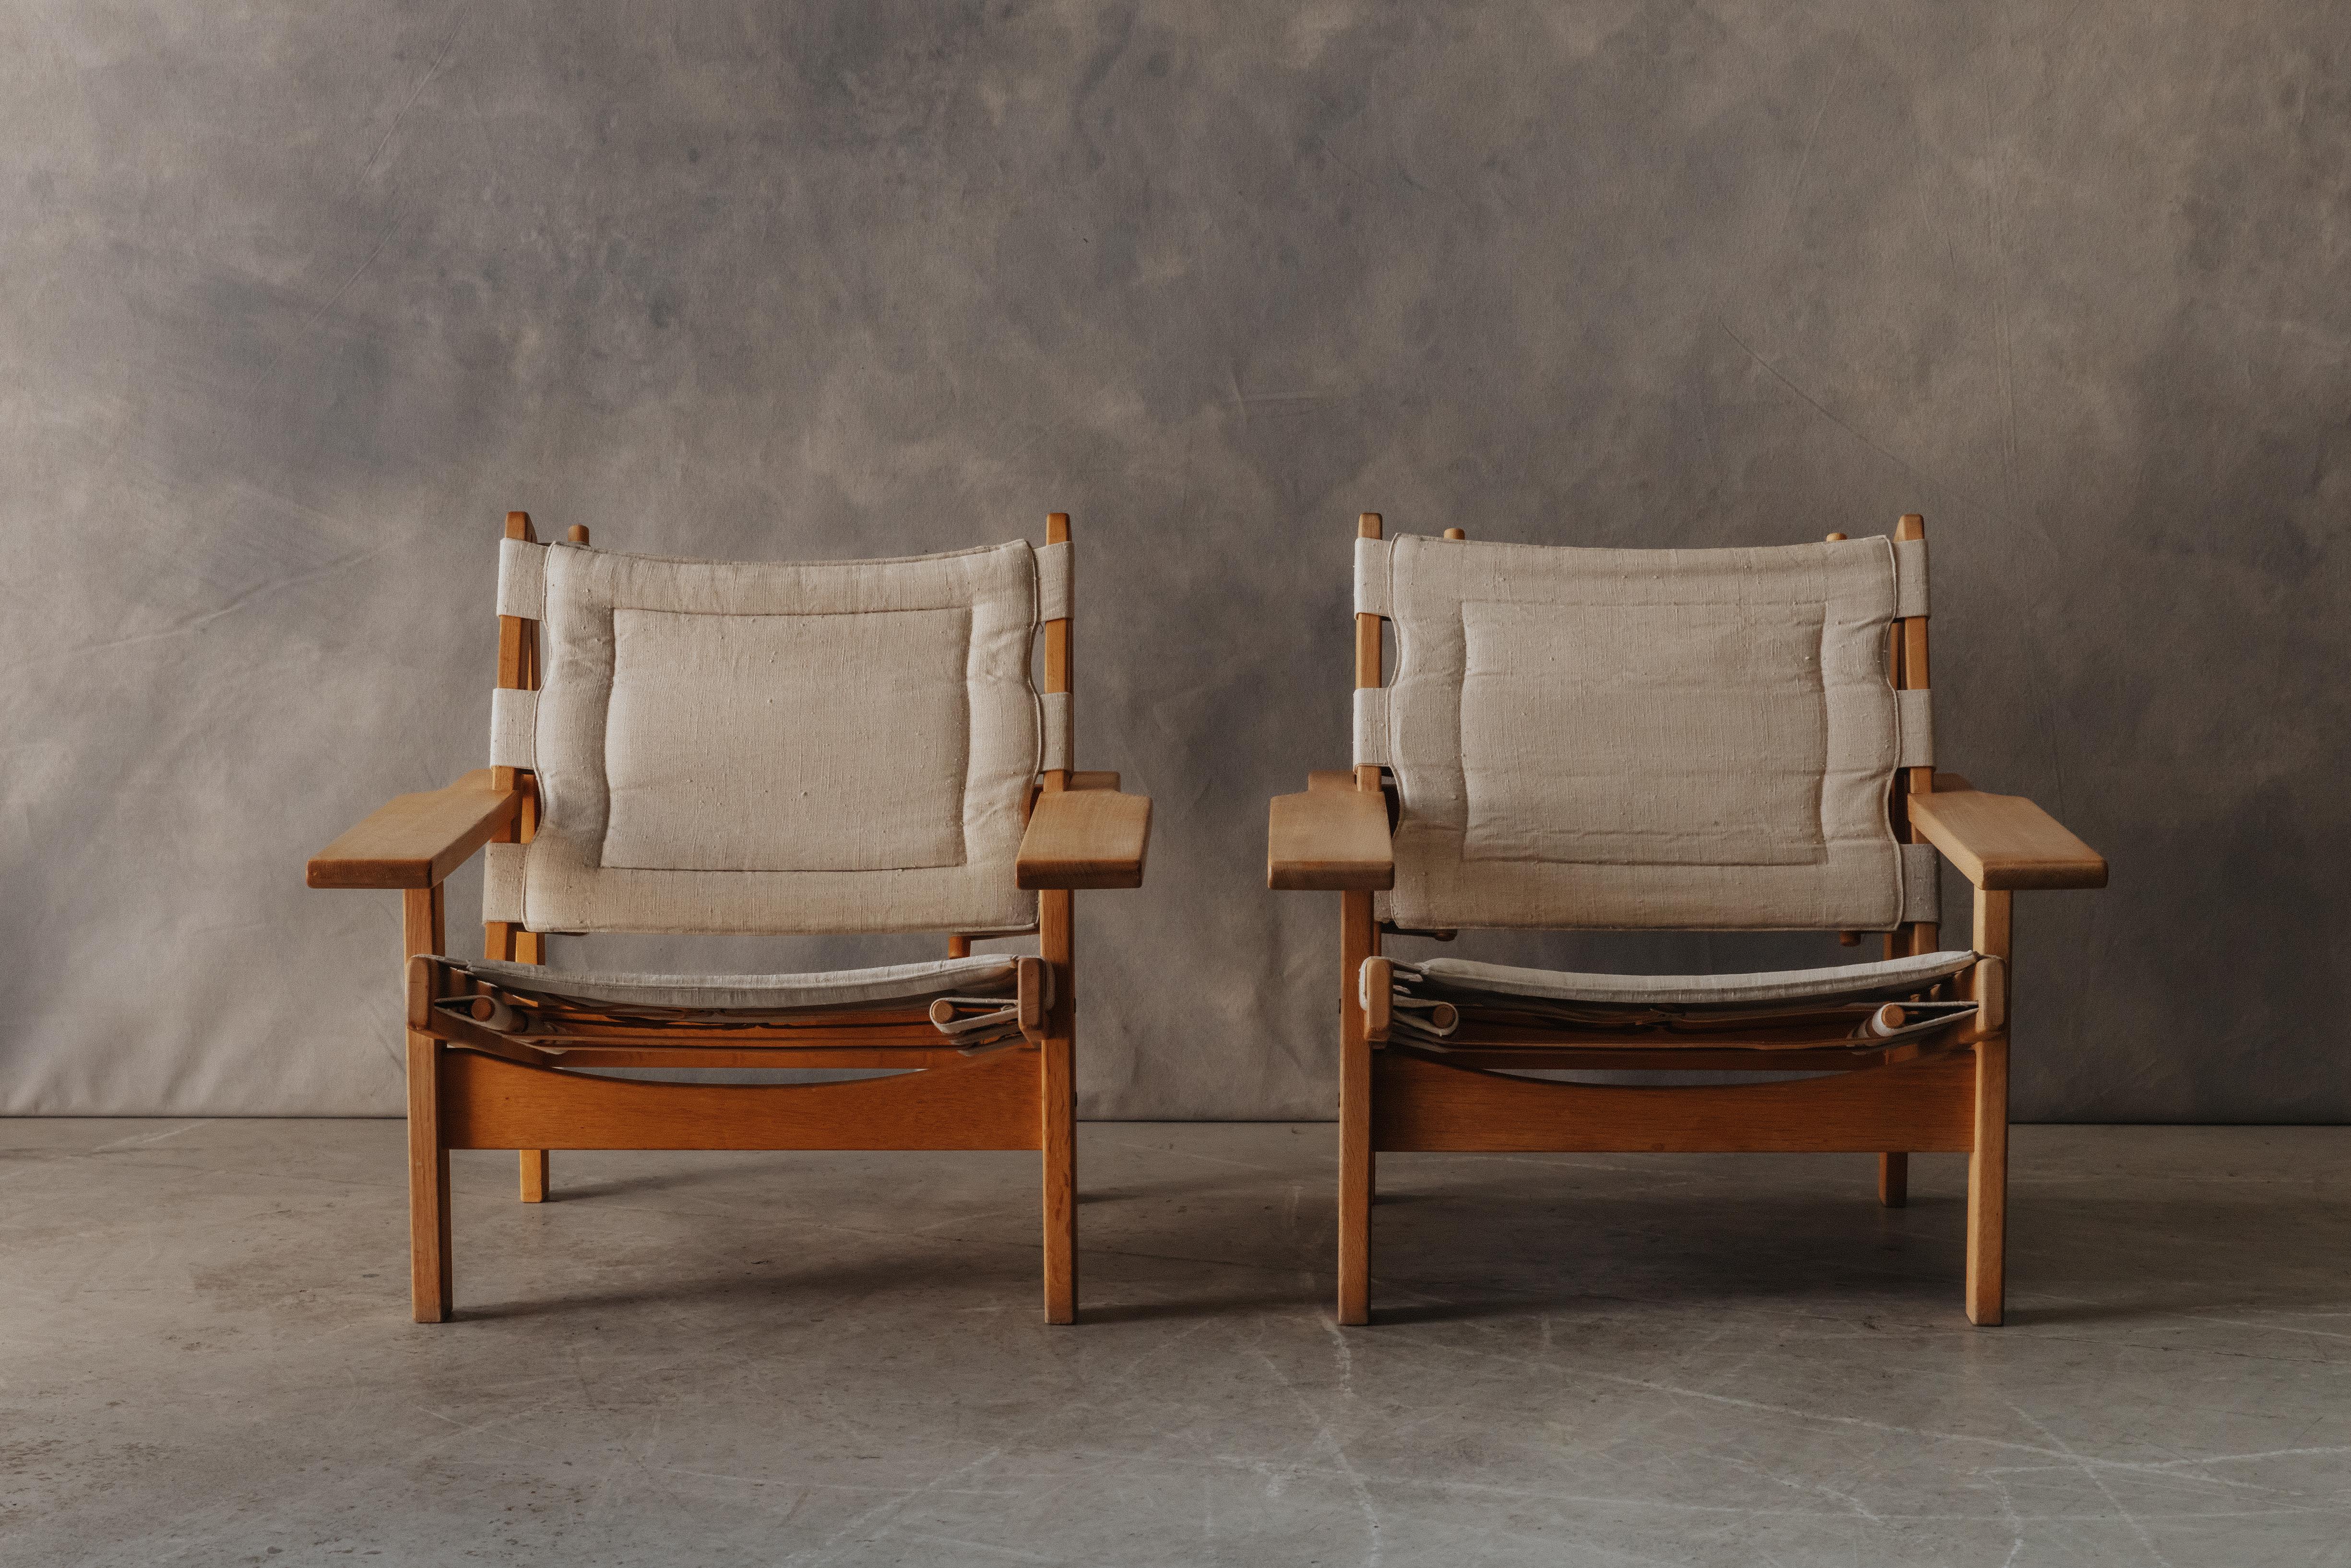 Vintage Pair Of Kurt Østervig Hunting Chairs From Denmark, Circa 1960.  Solid oak construction with original canvas upholstery.  Great condition.